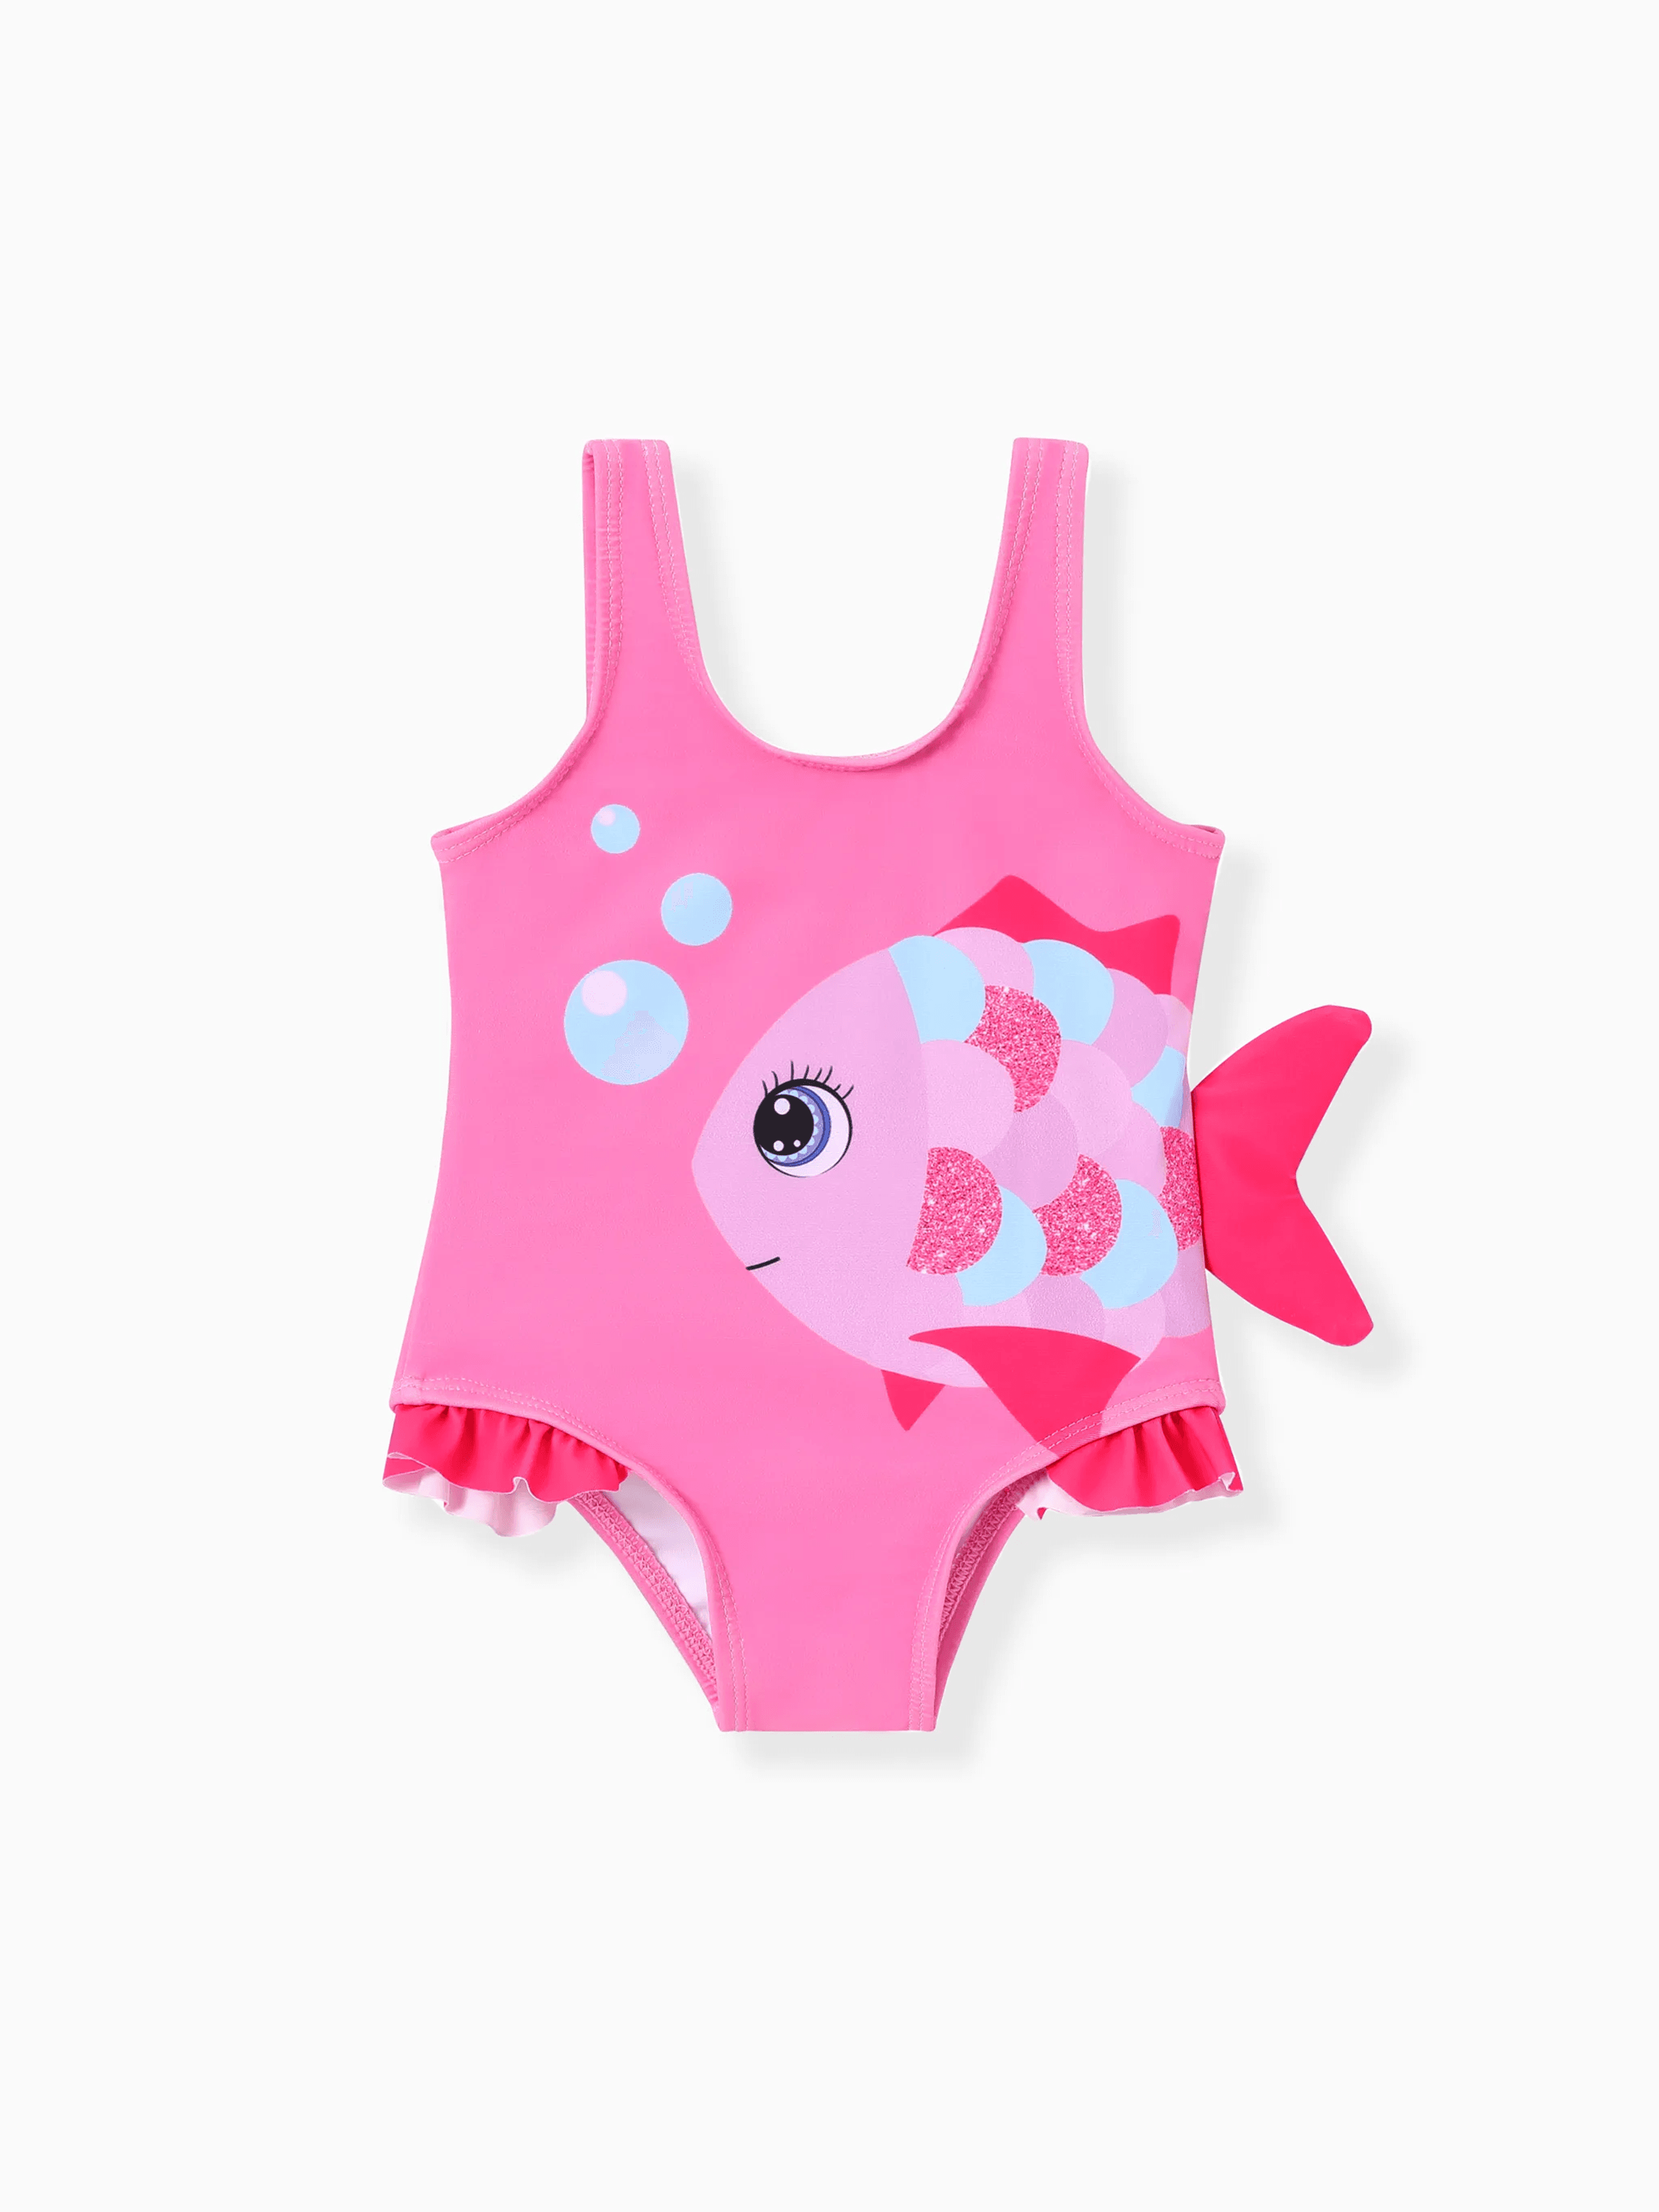 

Childlike Animal Pattern Girl's Swimsuit with Hanging Strap, 1pc, Polyester-Spandex Blend